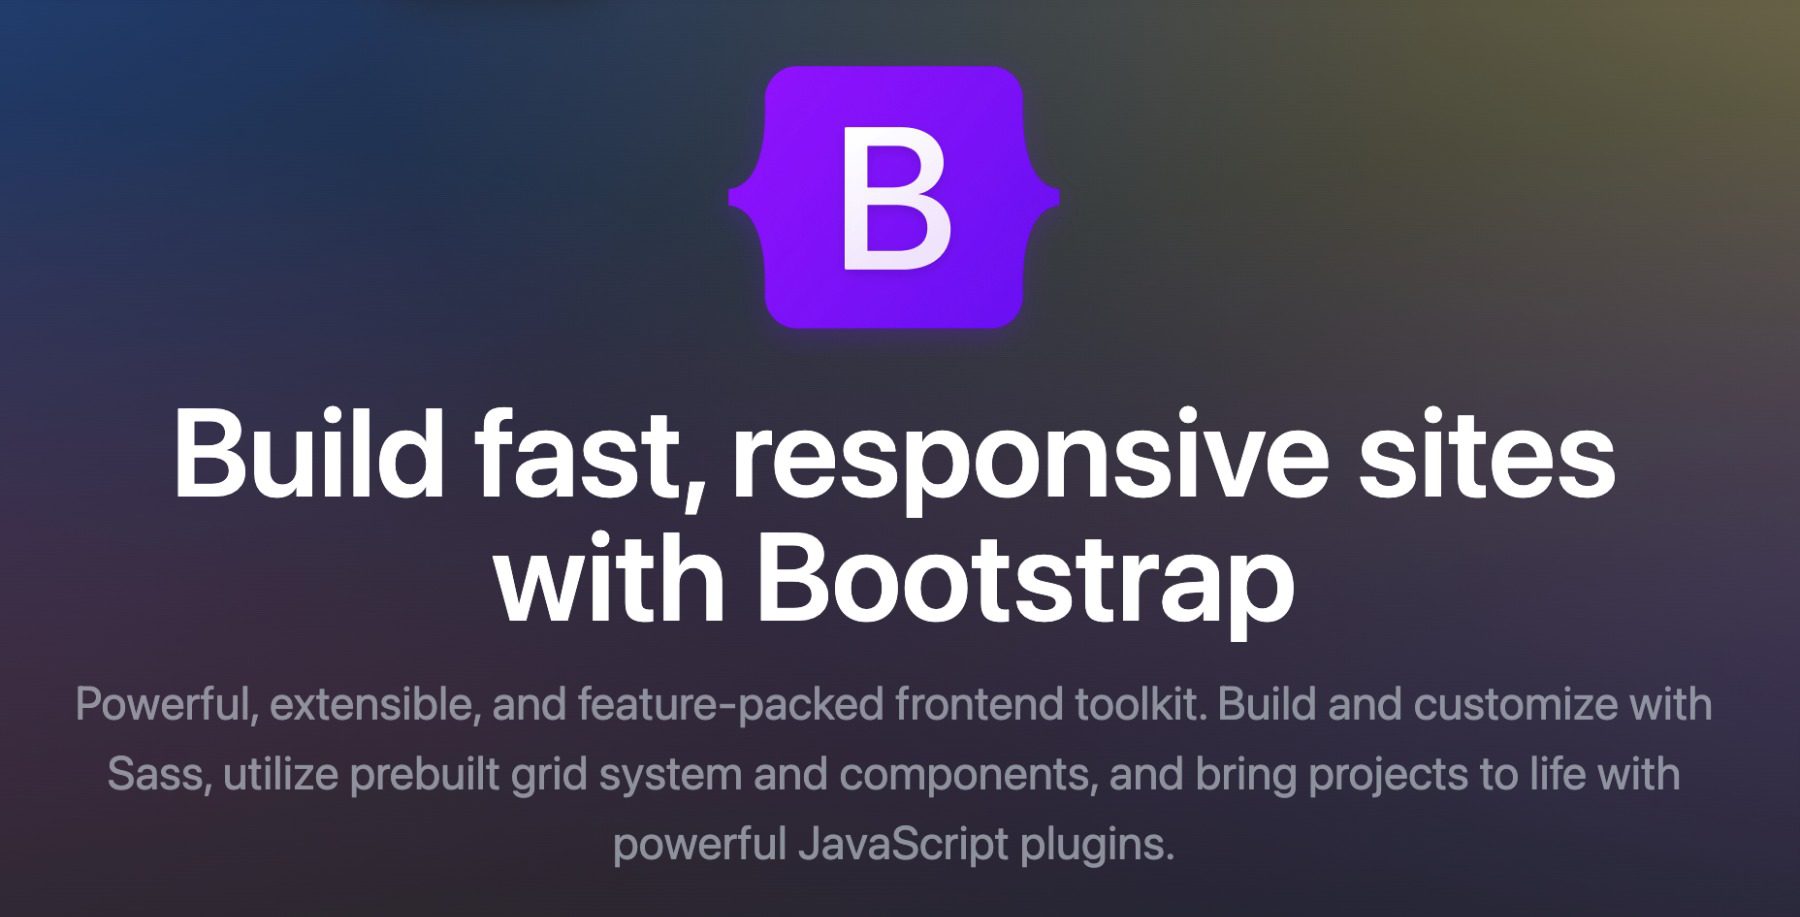 The Bootstrap homepage